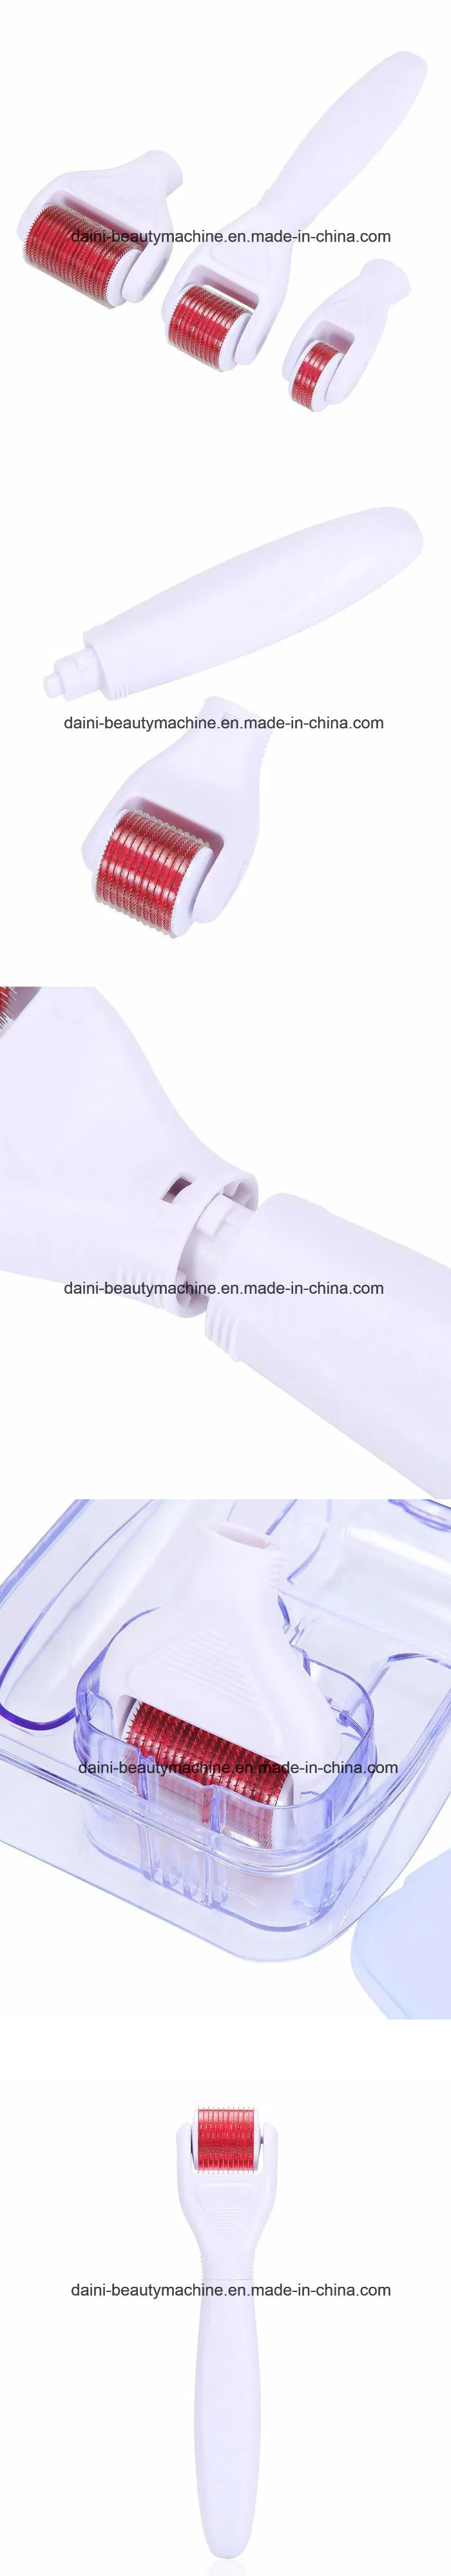 100% New Brand 4in1 0.5/1.0/1.5mm Titanium Derma Roller Micro Needle Therapy